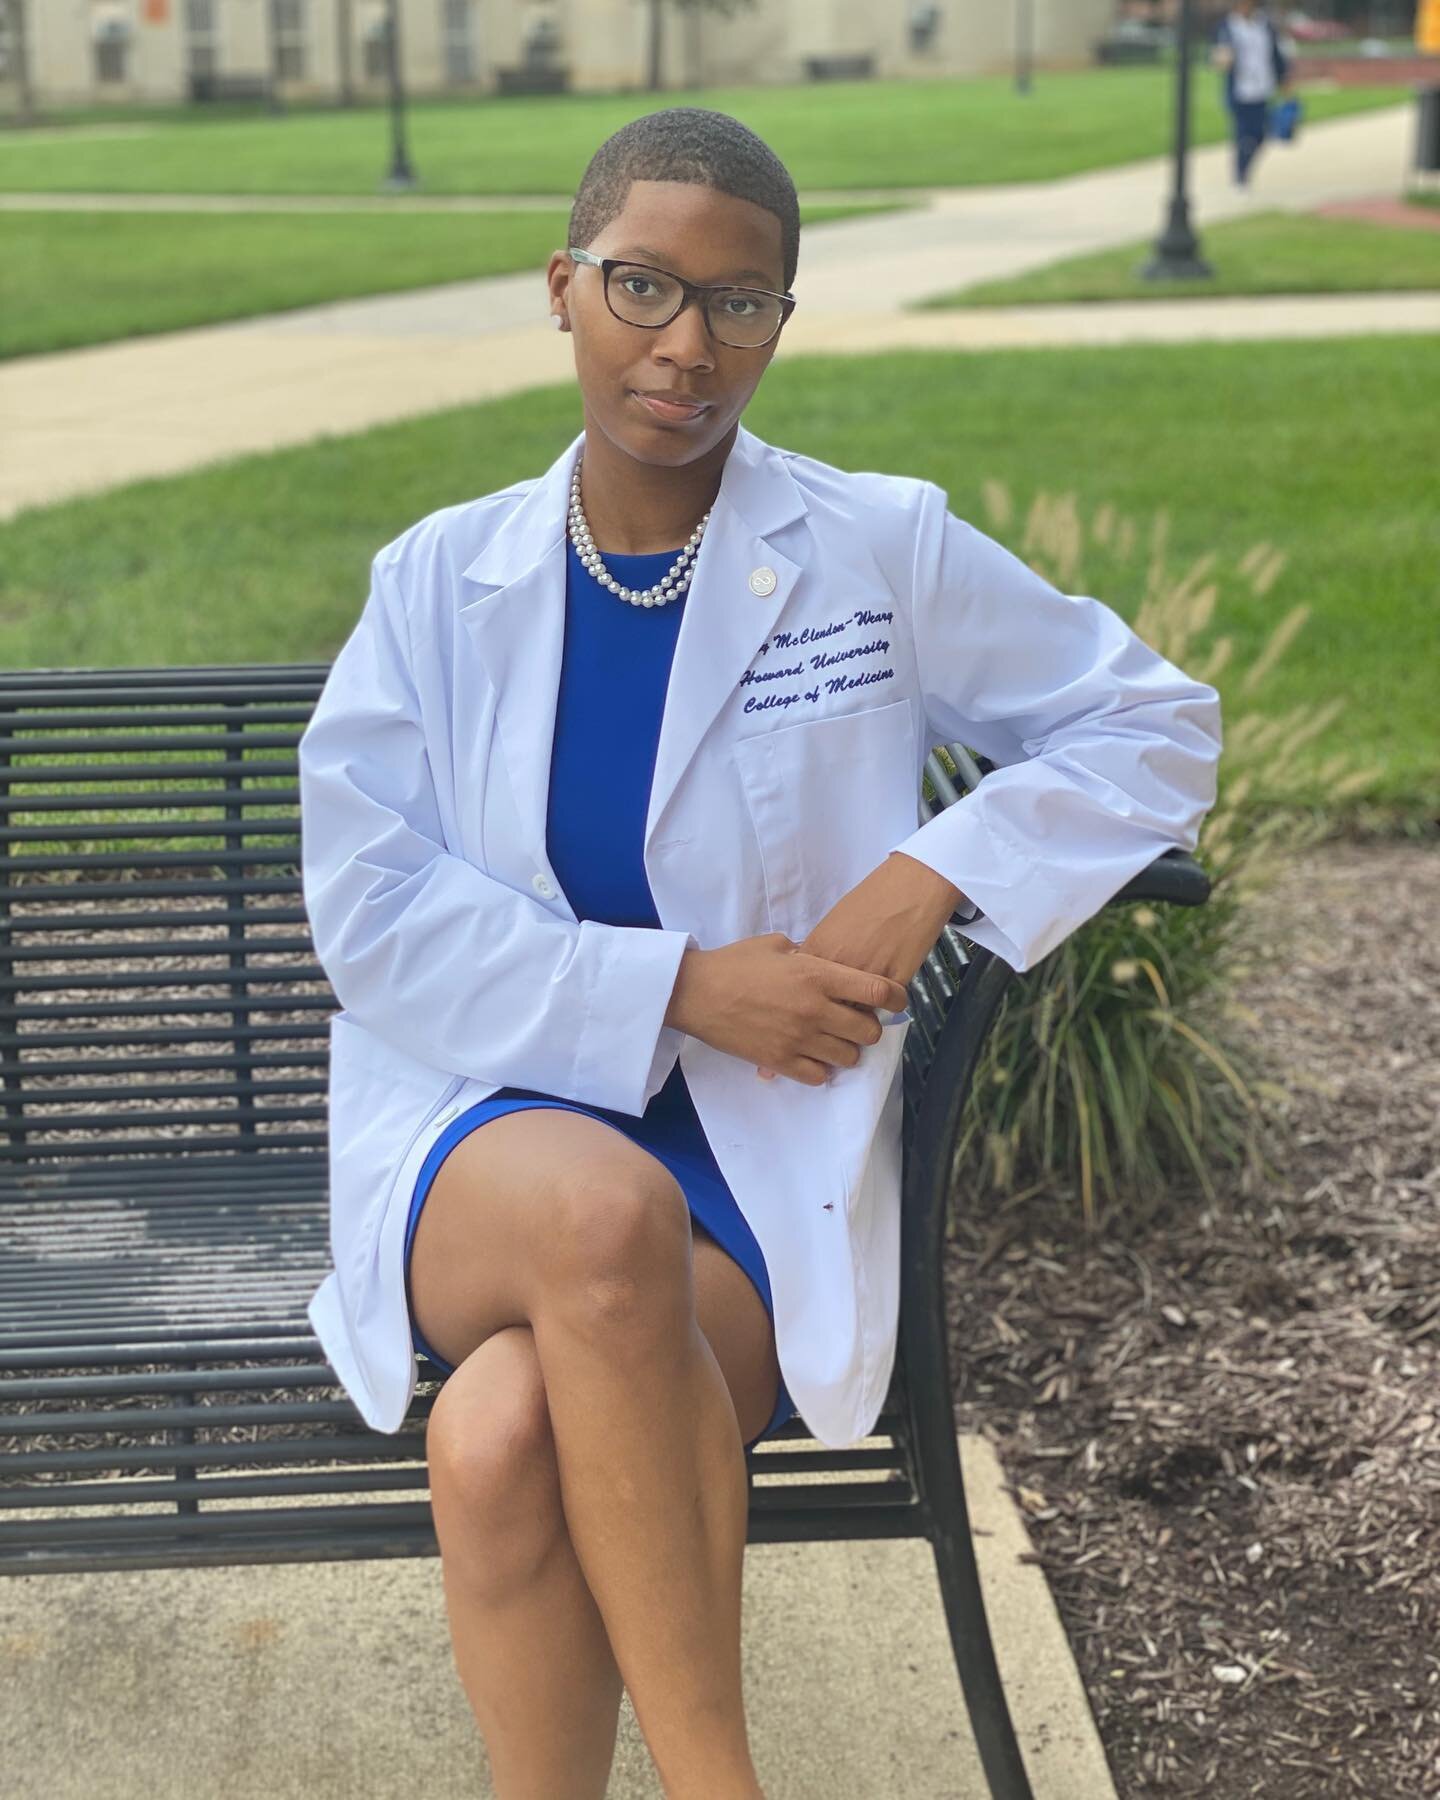 ✨ STUDENT SPOTLIGHT ✨

Name: Bryttany McClendon-Weary - Vice President of Community Service

Hometown: Houston, TX

College/Education: The Illustrious Howard University

Specialty of Interest: OB/GYN

Fun Fact: One of my favorite quotes is from Dr. C